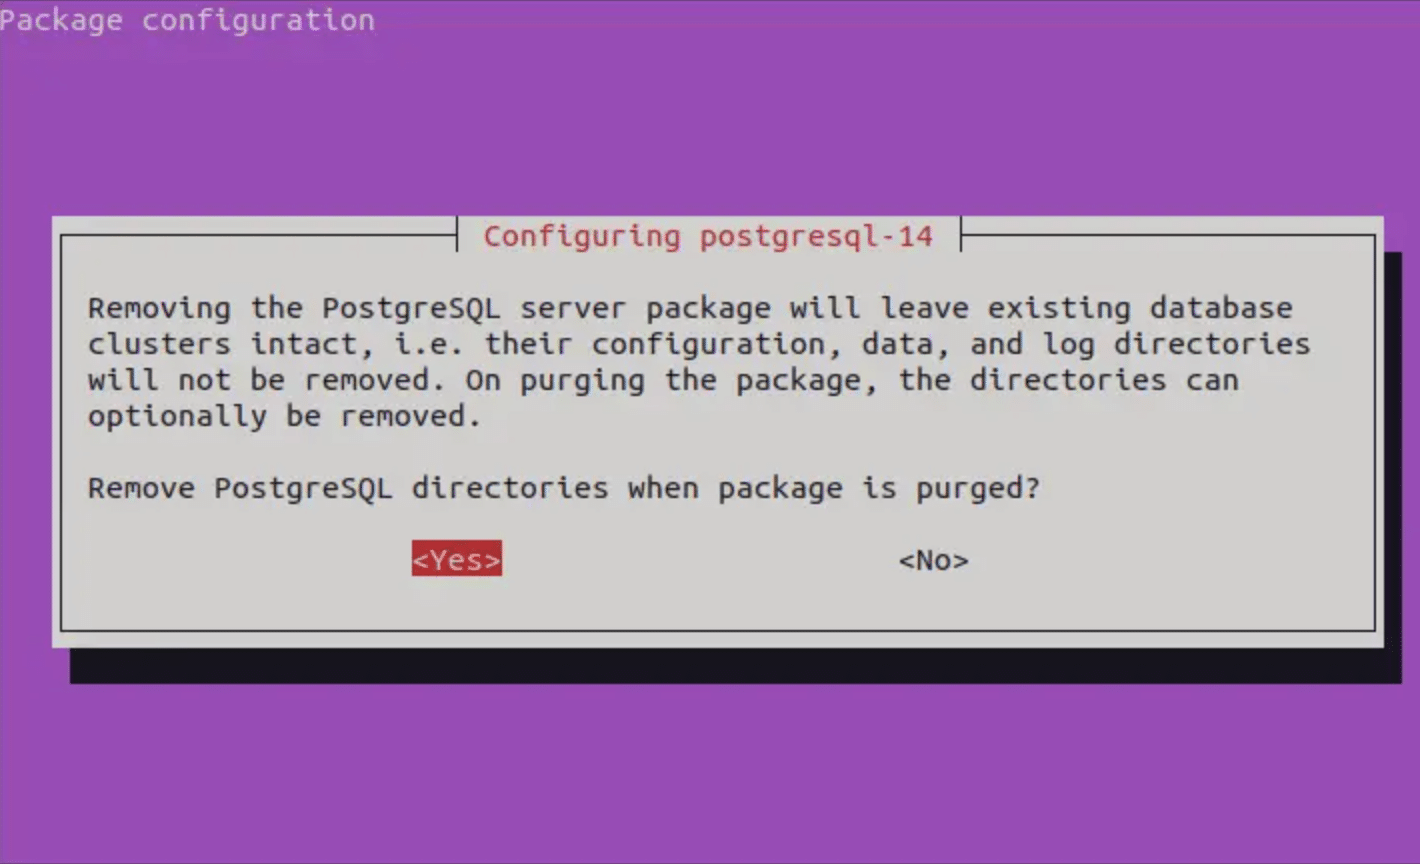 remove the PostgreSQL packages